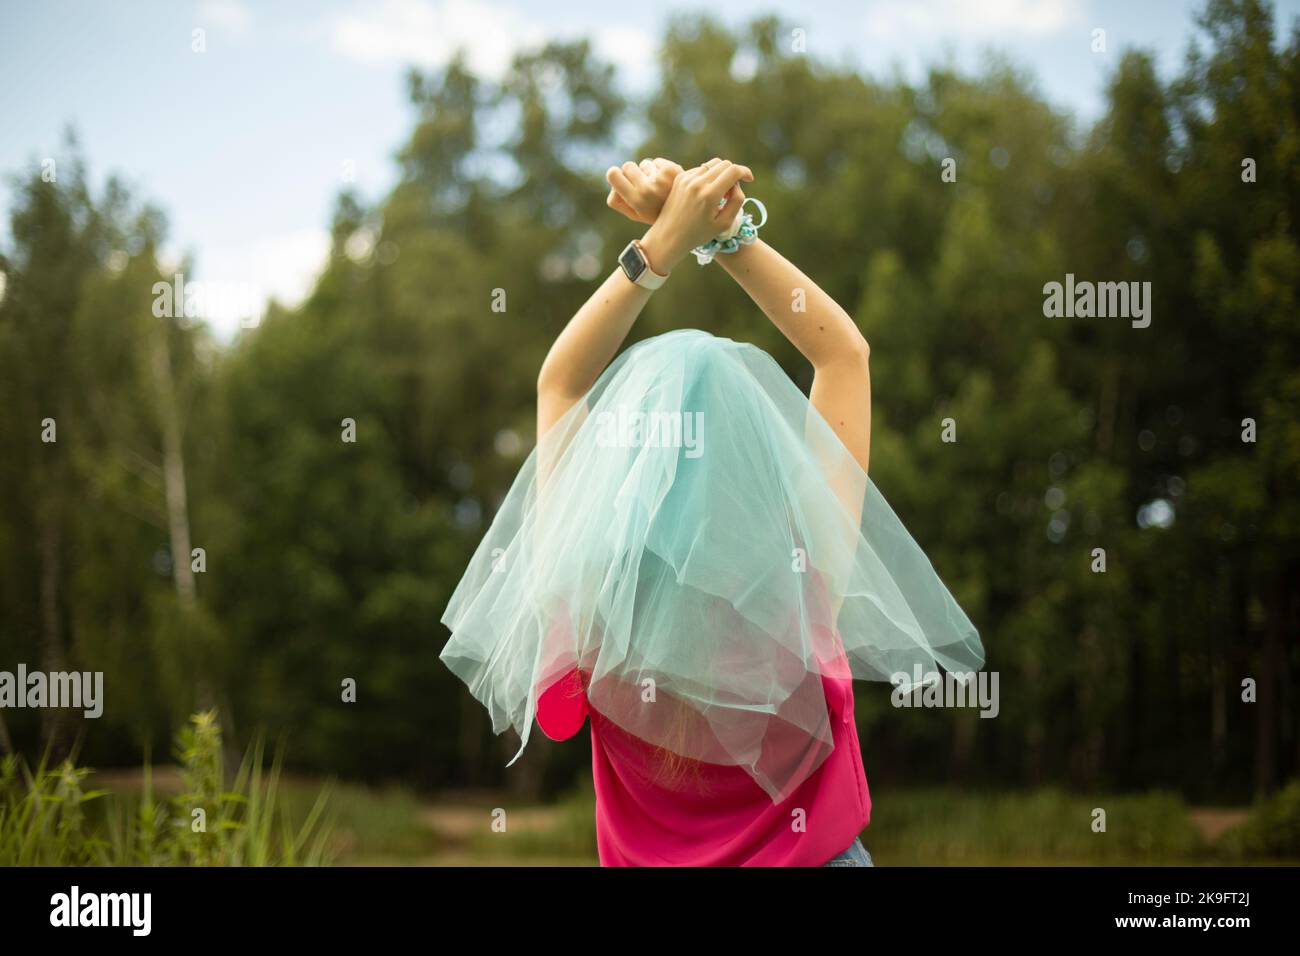 Blue veil on head. Bridesmaid's clothes. Lightweight fabric in summer. Girl in park. Hands raised up. Pink t-shirt. Stock Photo